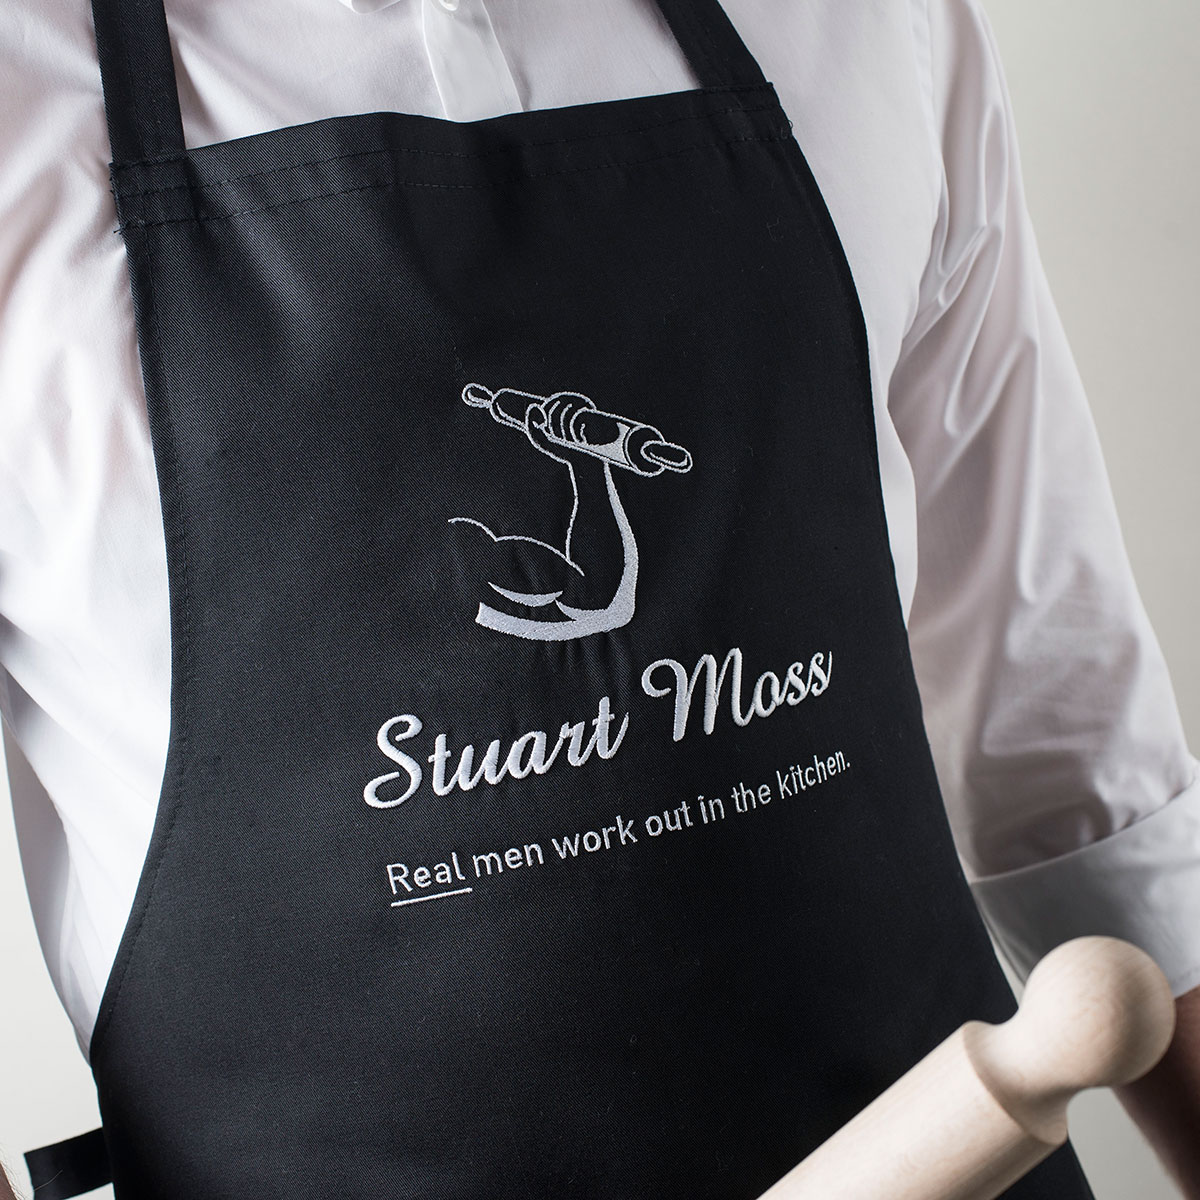 Personalised Apron - Real Men Work Out In the Kitchen